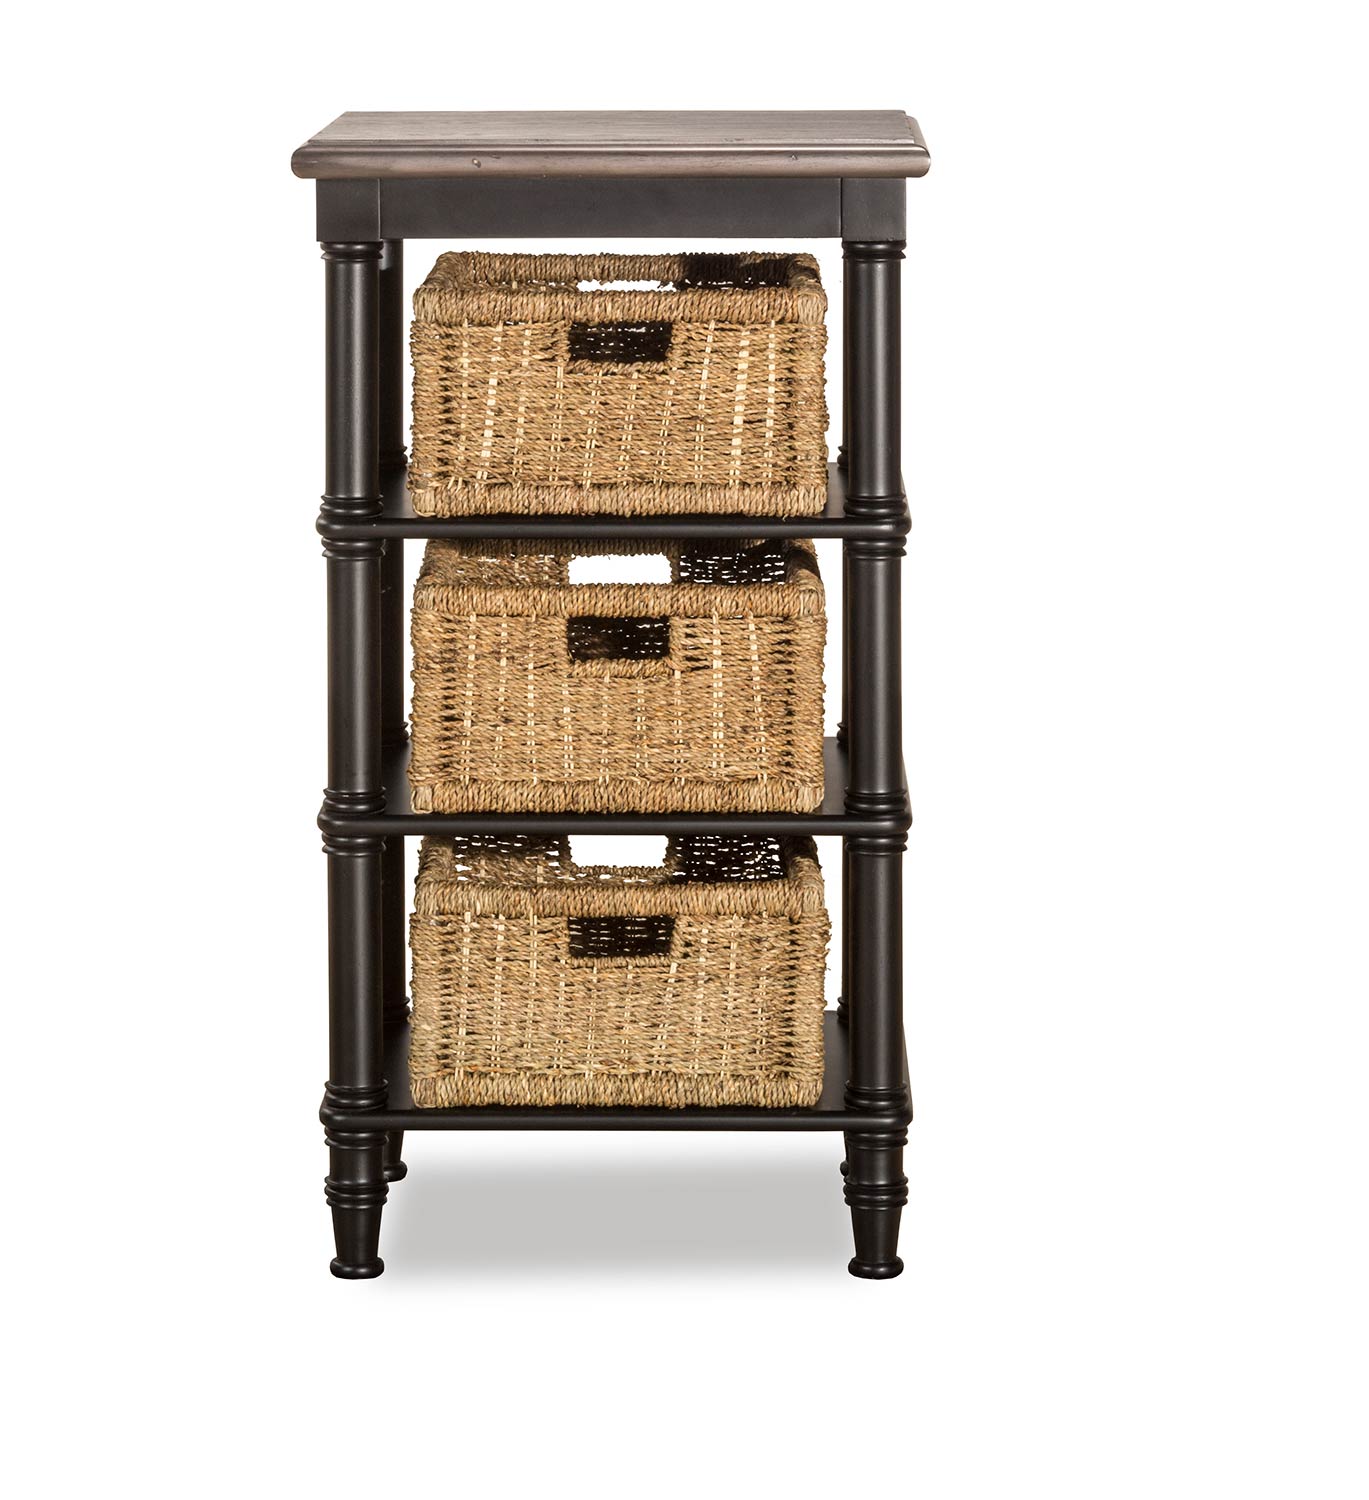 Hillsdale Seneca Basket Stand with 3 Baskets - Waxed Black/Walnut/Natural Seagrass